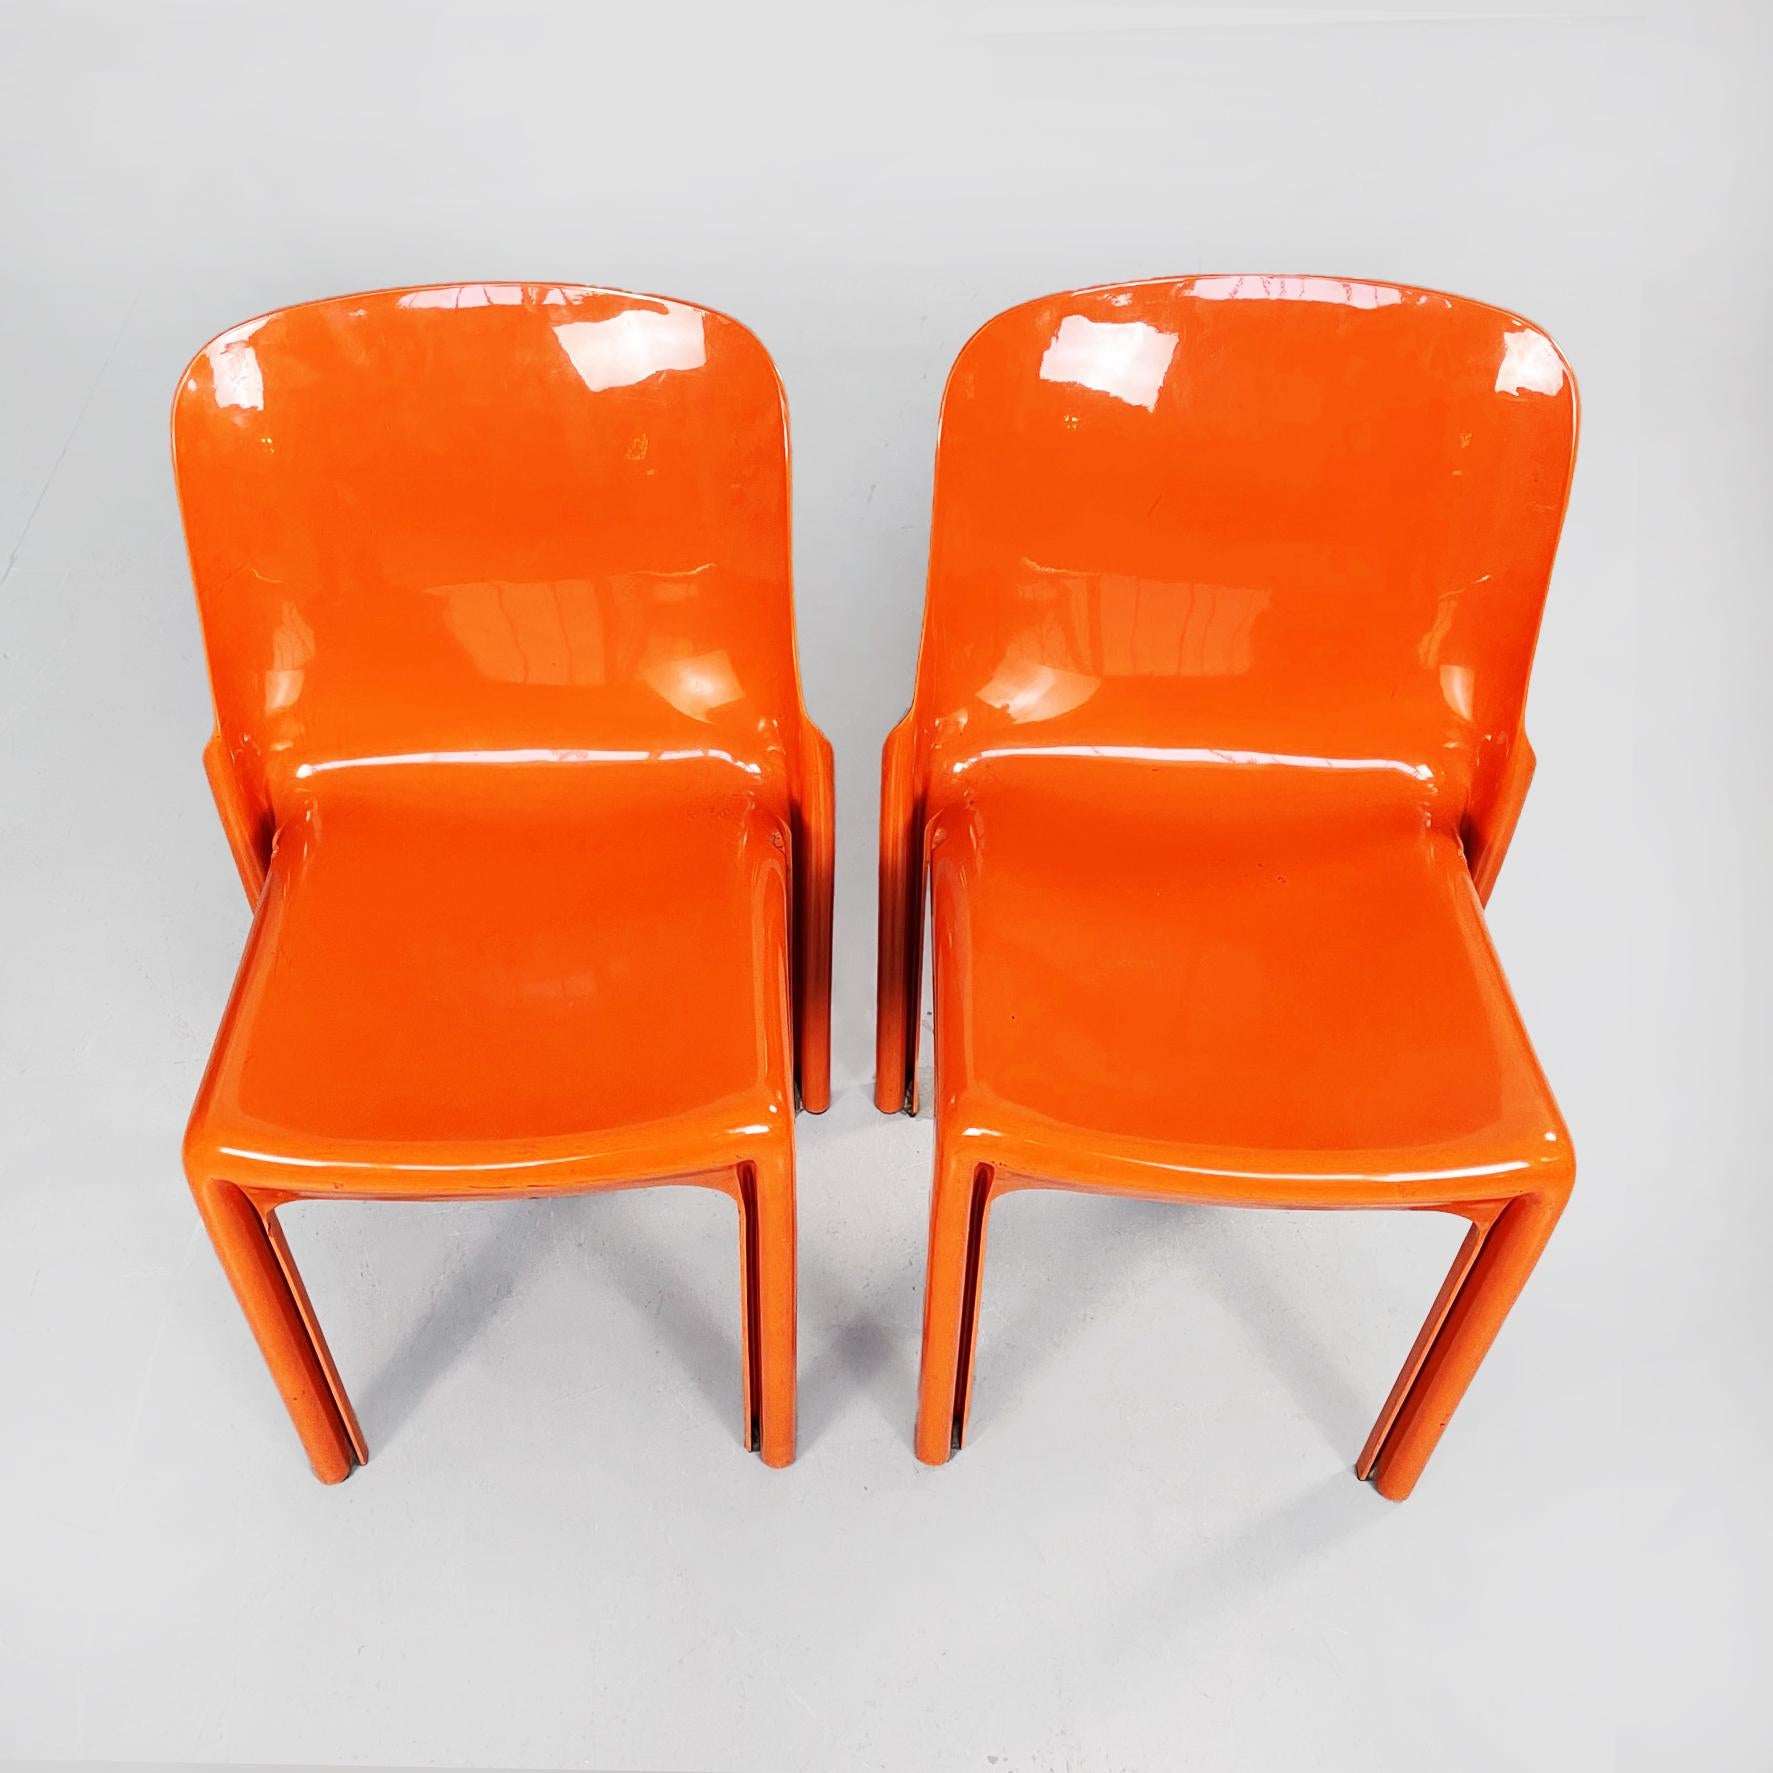 Italian mid-century Orange plastic Selene chairs by Magistretti for Artemide, 1960s
Pair of Selene chairs in bright dark orange plastic. The rectangular seat and back have rounded corners. The plastic monocoque structure has grooves along the legs